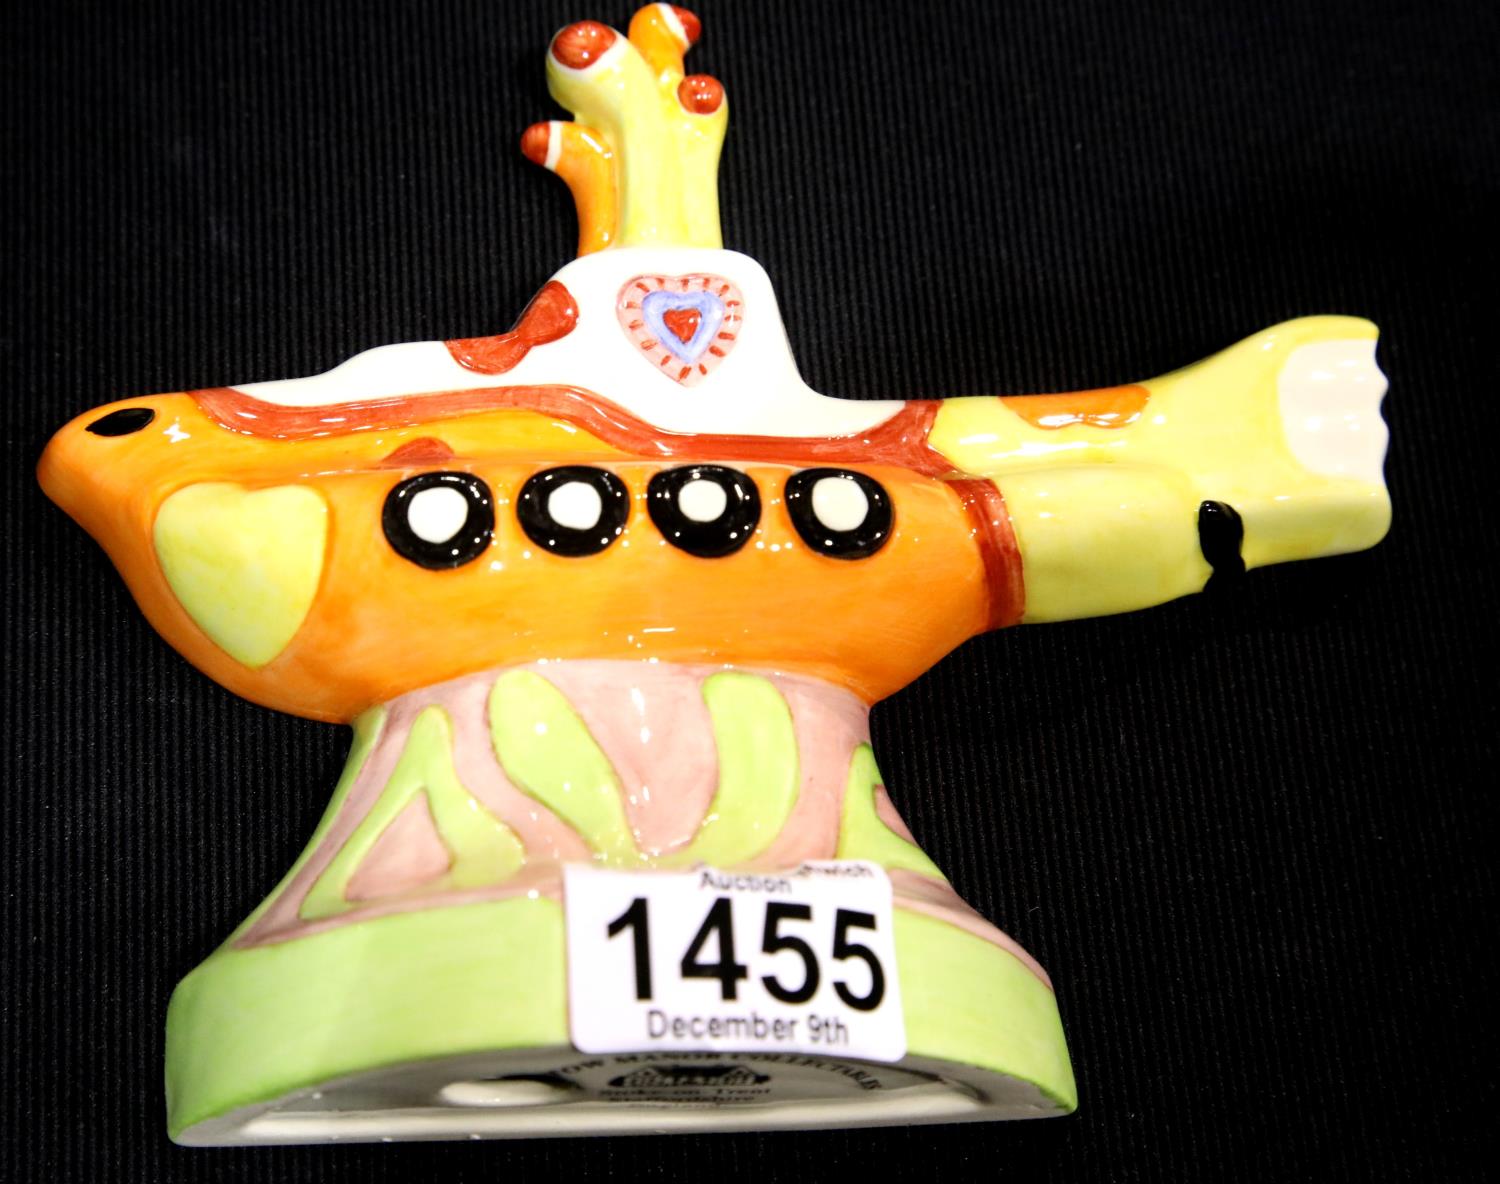 Flatback Yellow Submarine from Bairstow Manor Collectables, H: 15 cm. P&P Group 1 (£14+VAT for the